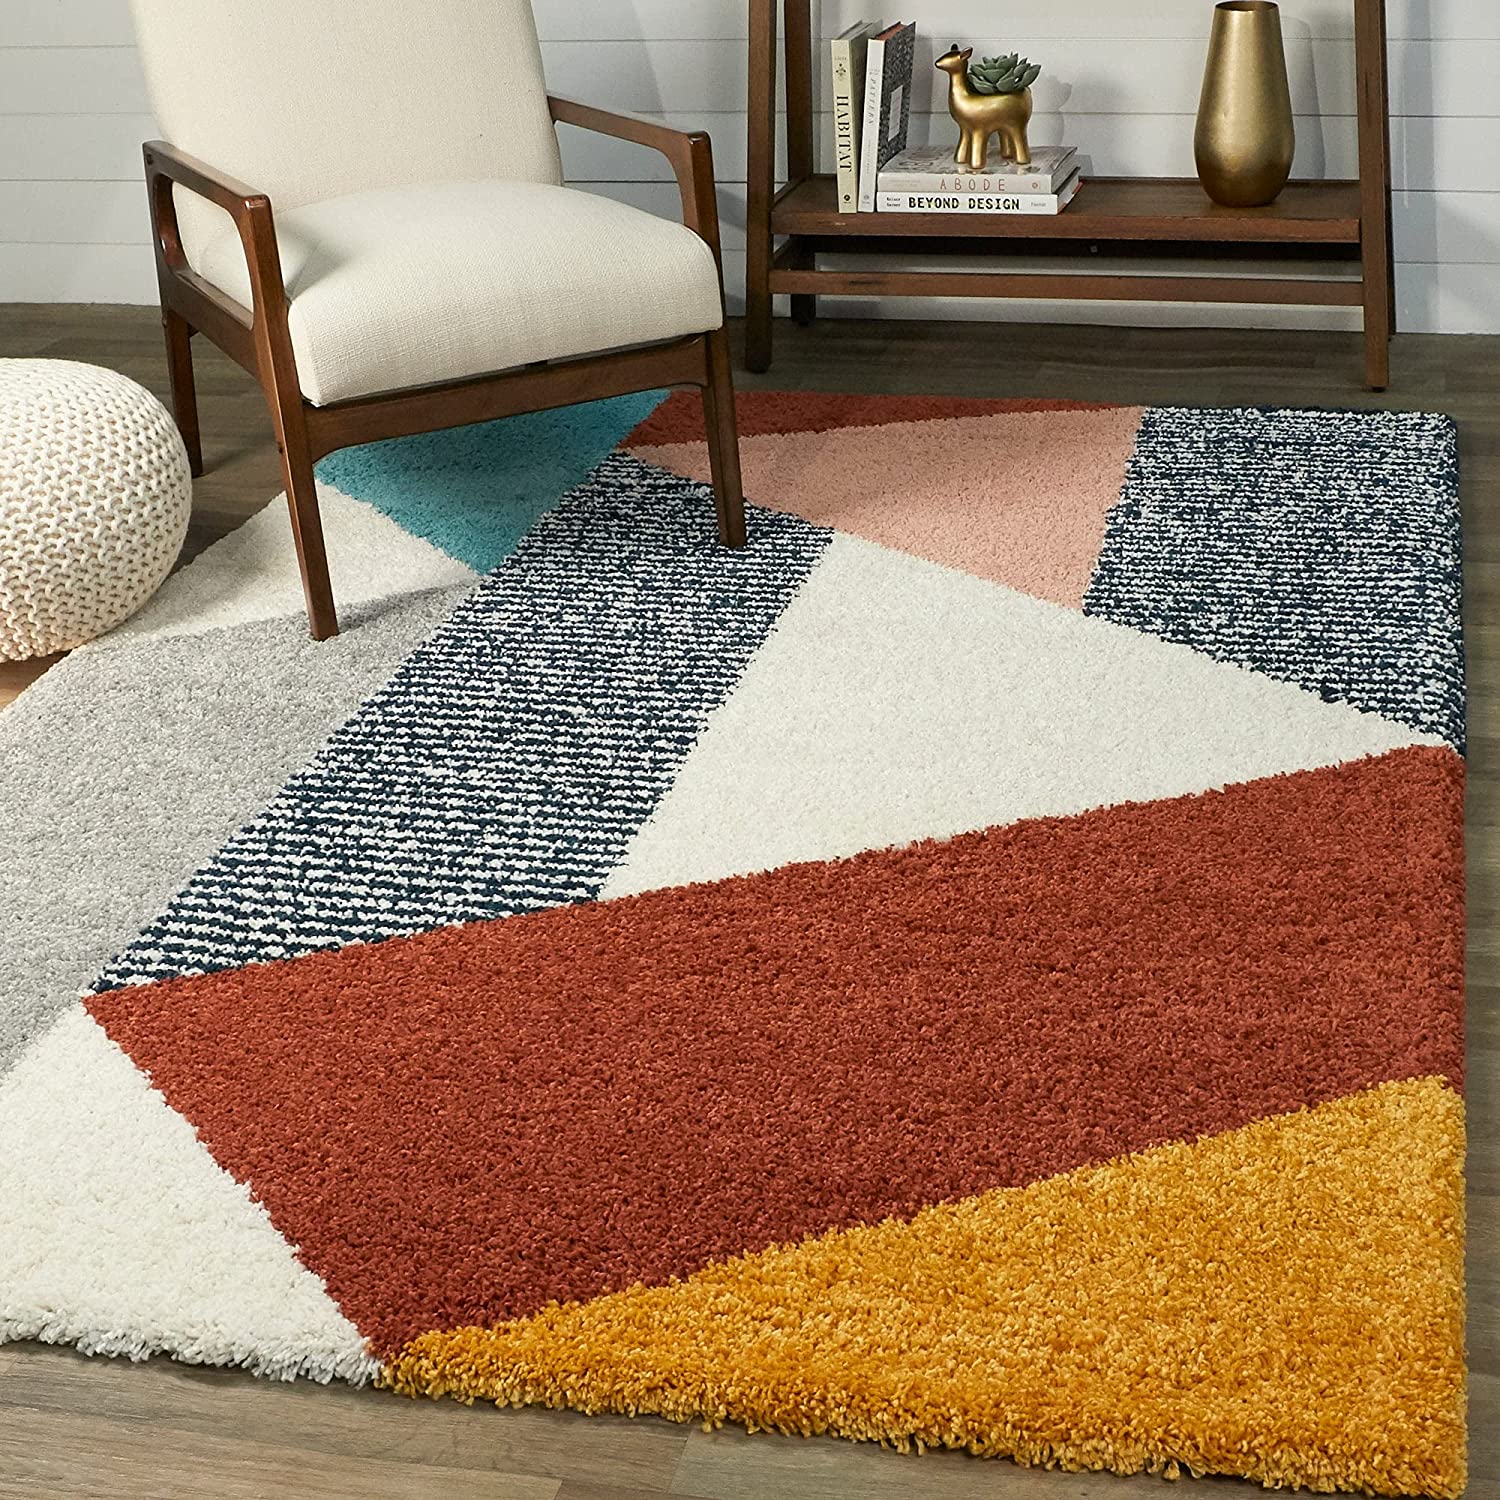 Abstract - Carpet